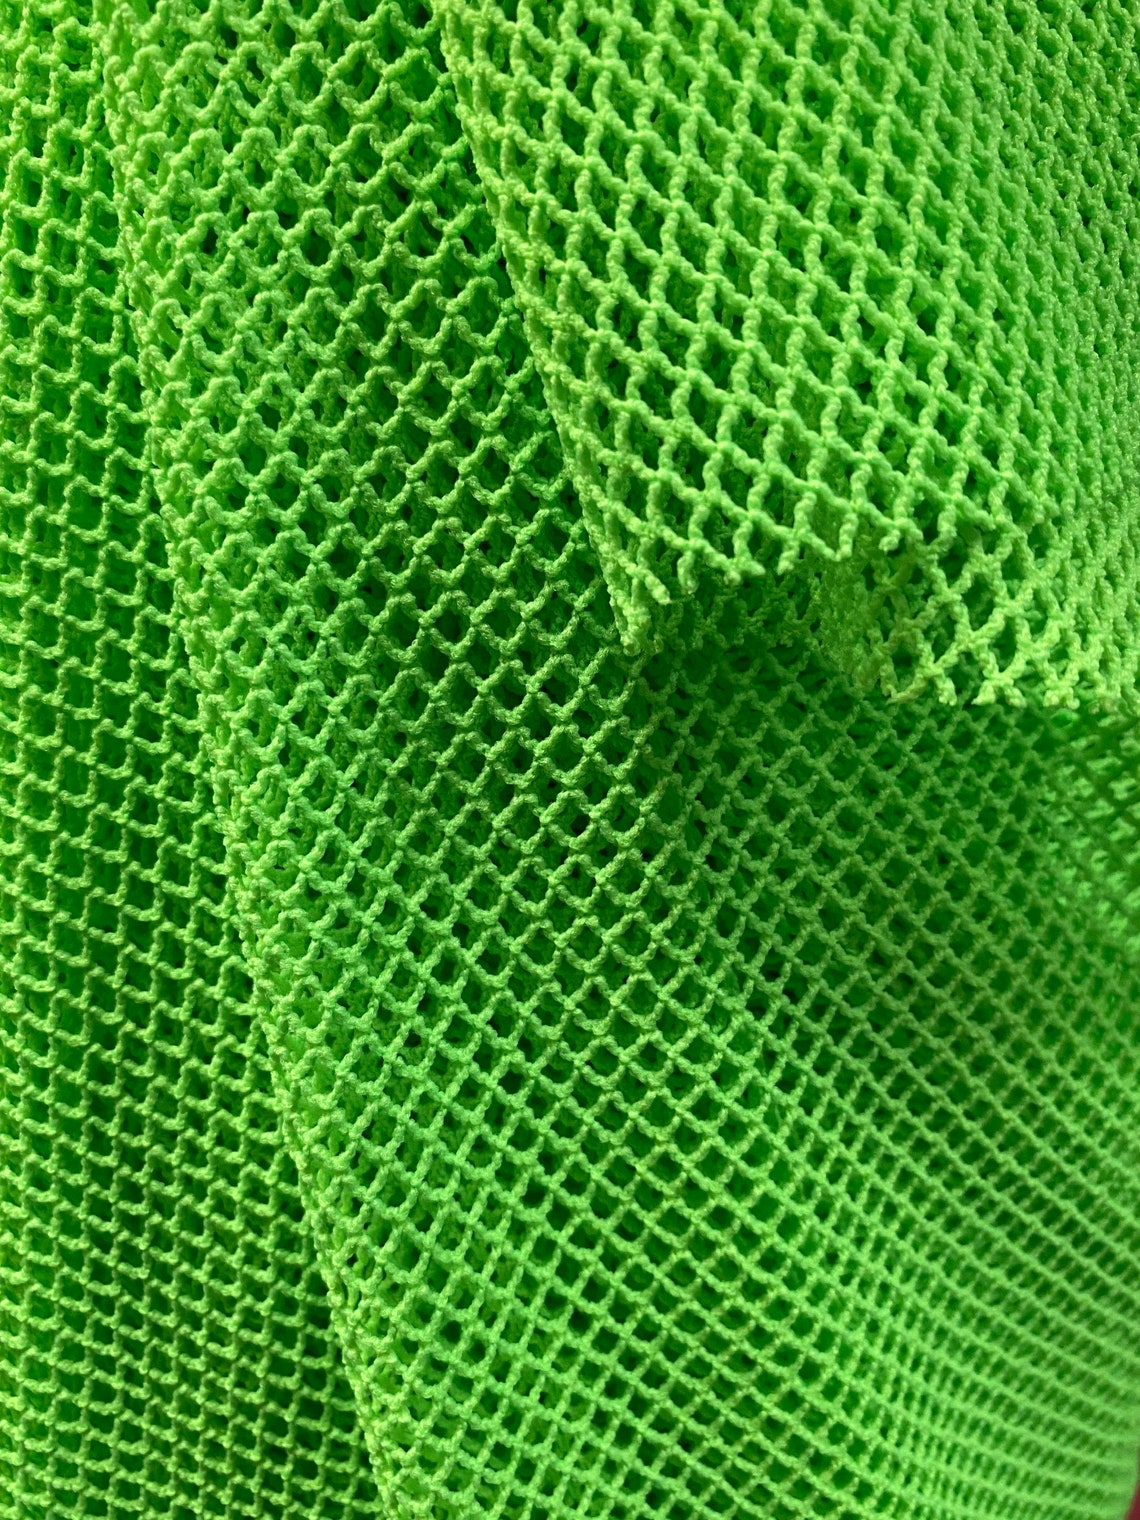 Vibrant Neon Green Mini Fishnet Stretch fabric sold by the | Etsy